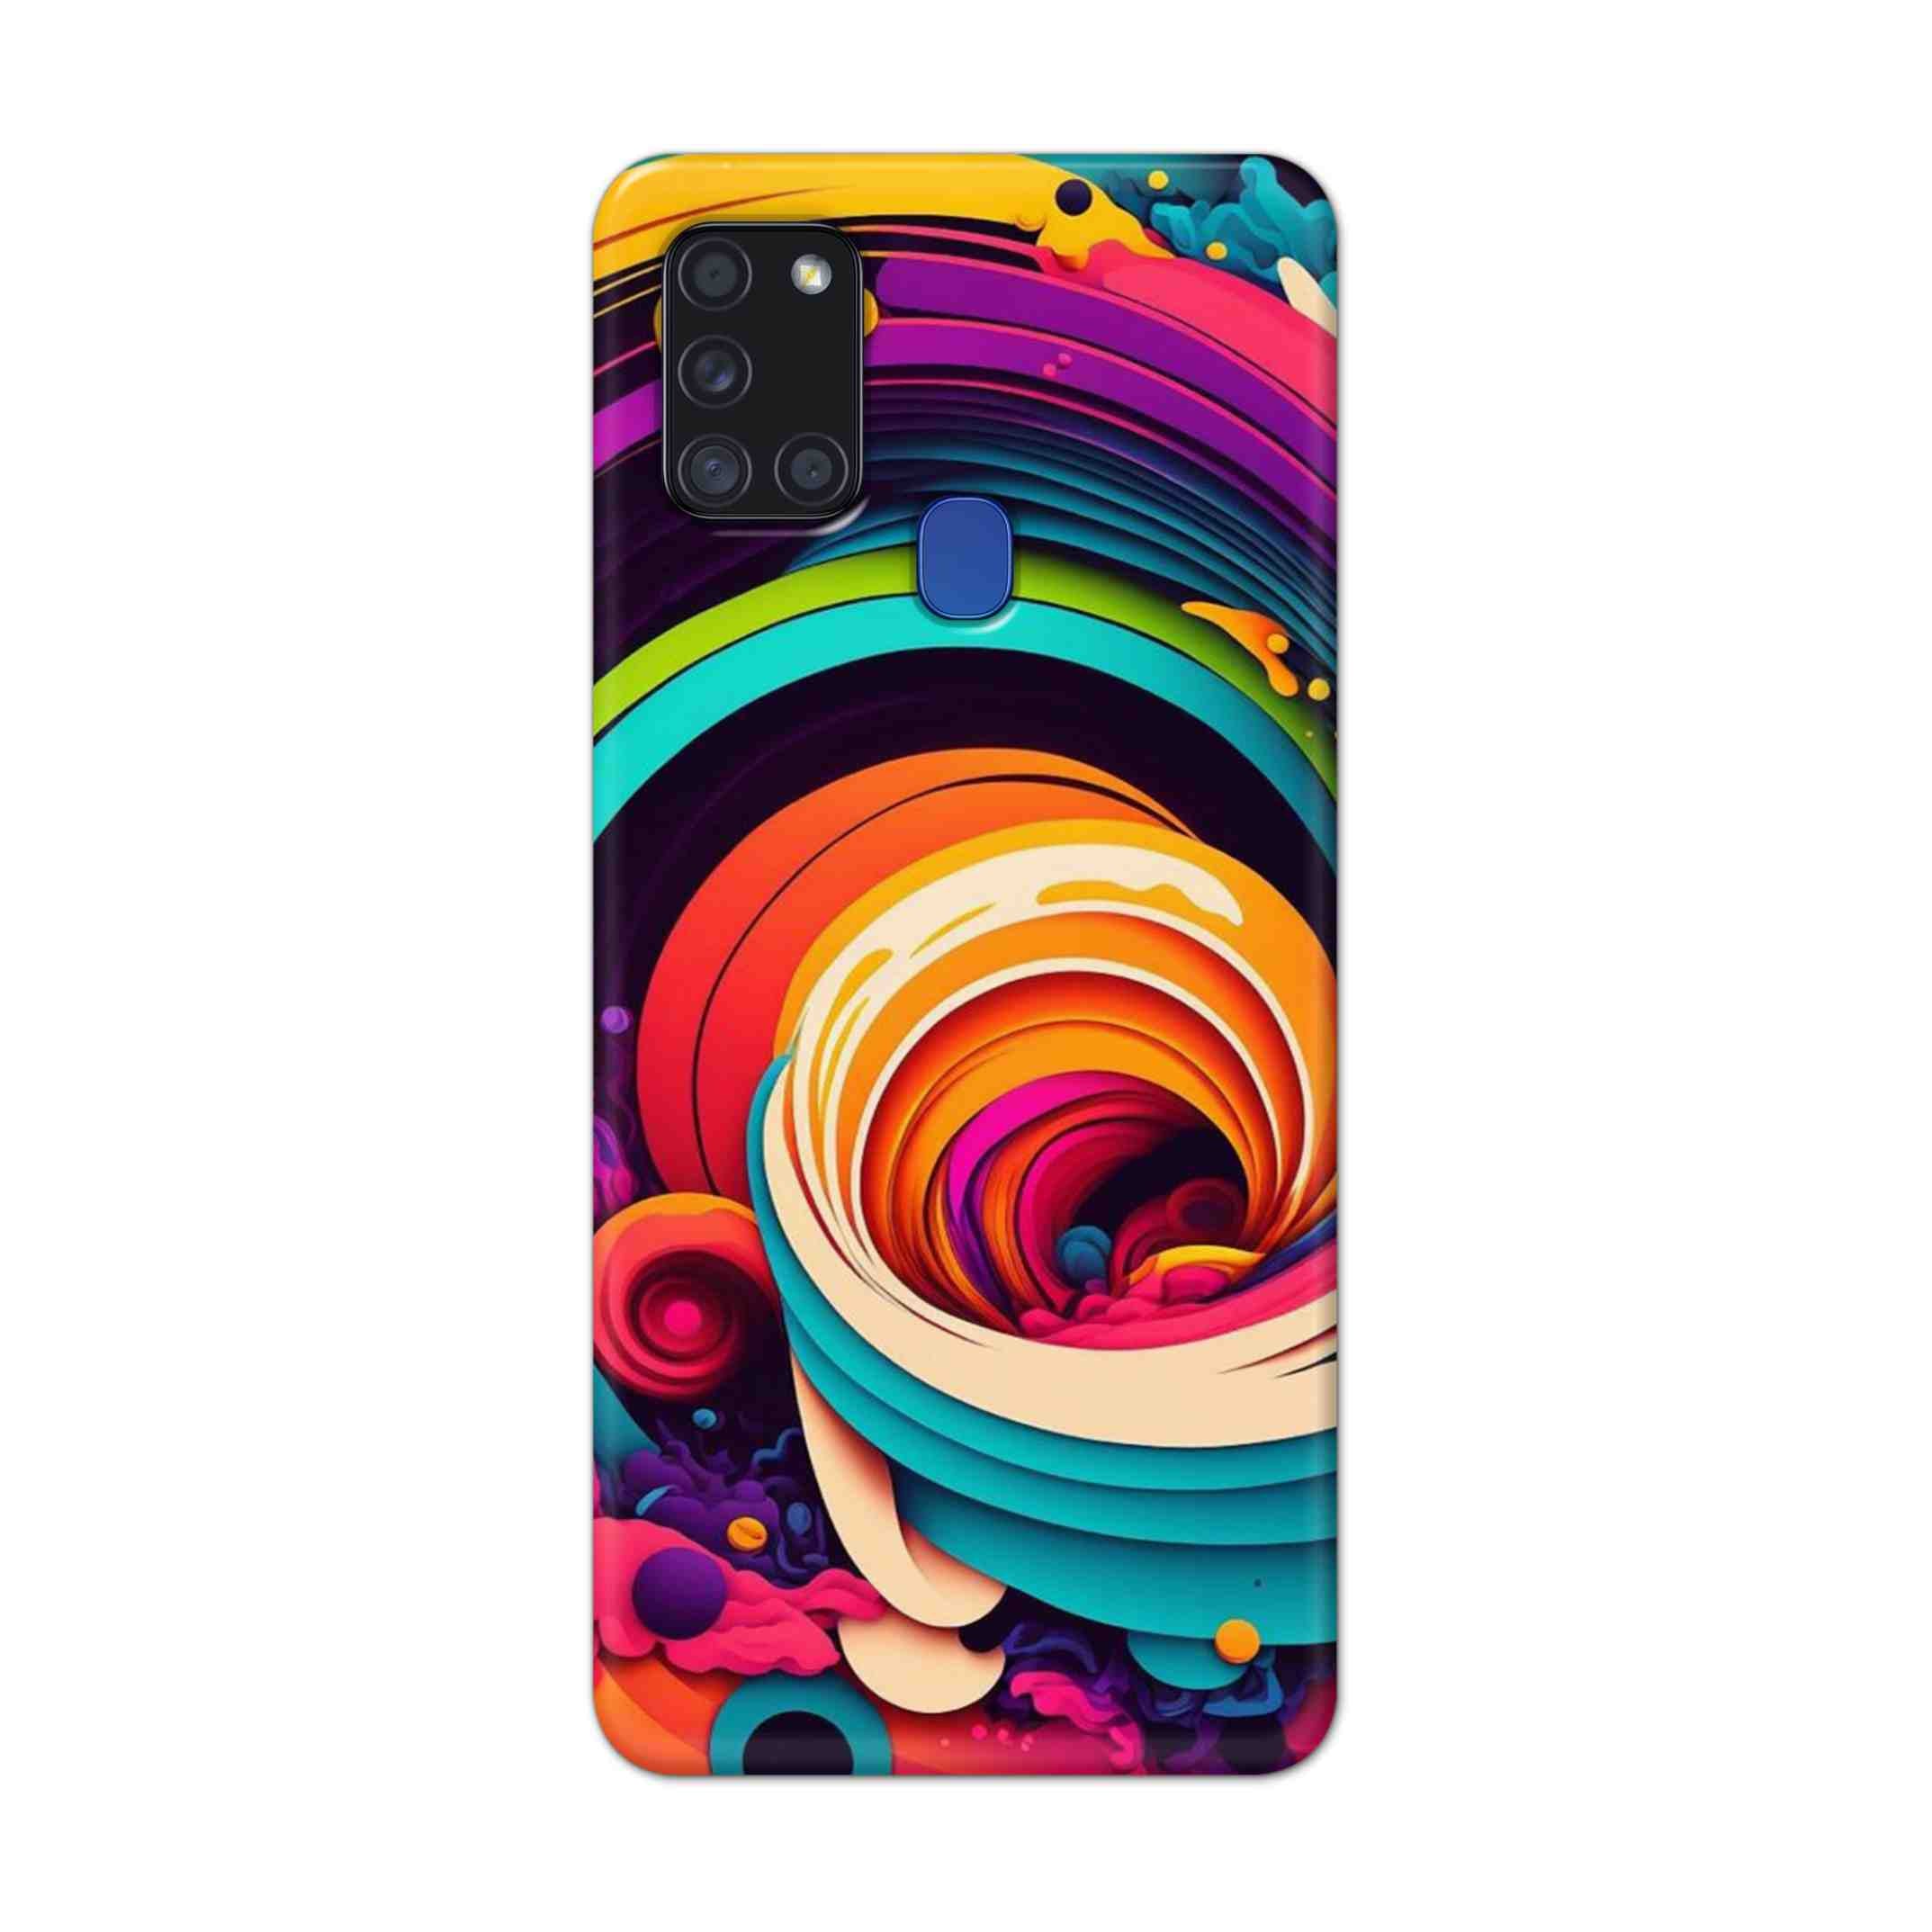 Buy Colour Circle Hard Back Mobile Phone Case Cover For Samsung Galaxy A21s Online